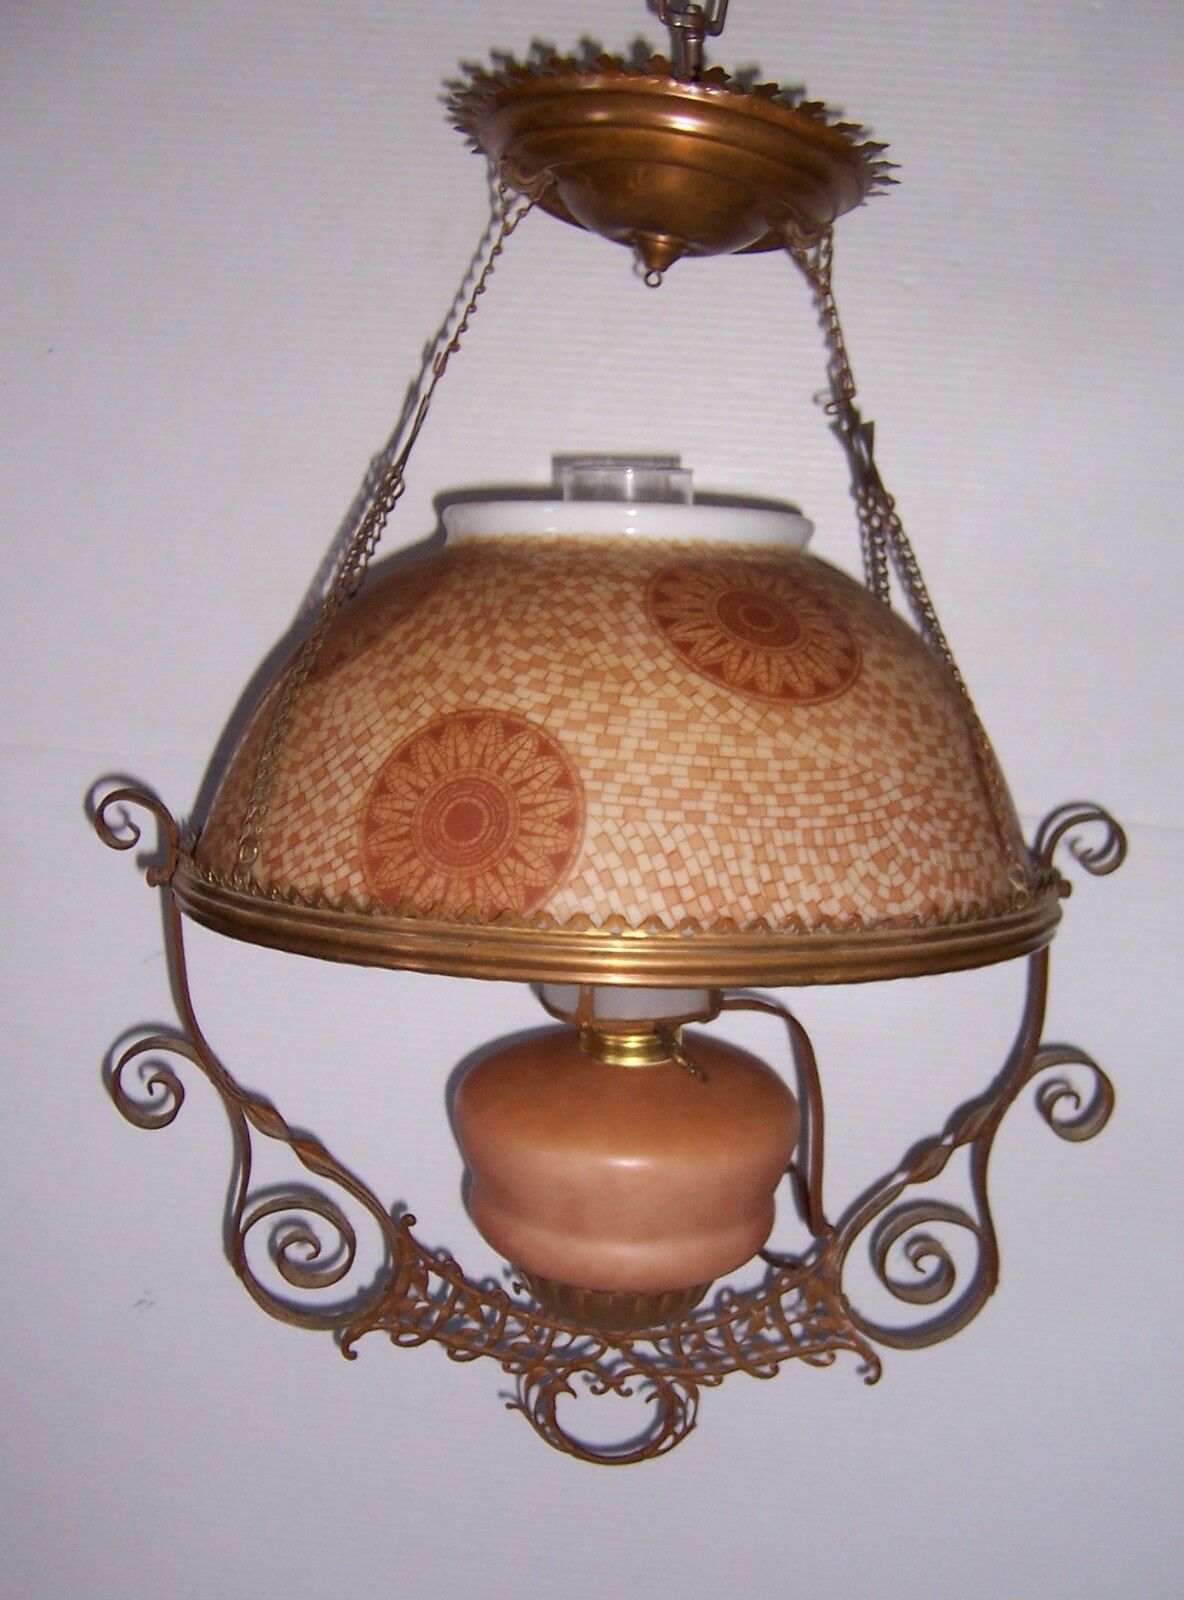 BEAUTIFUL ANTIQUE OIL LAMP CEILING LIGHT CONVERTED TO ELECTRIC